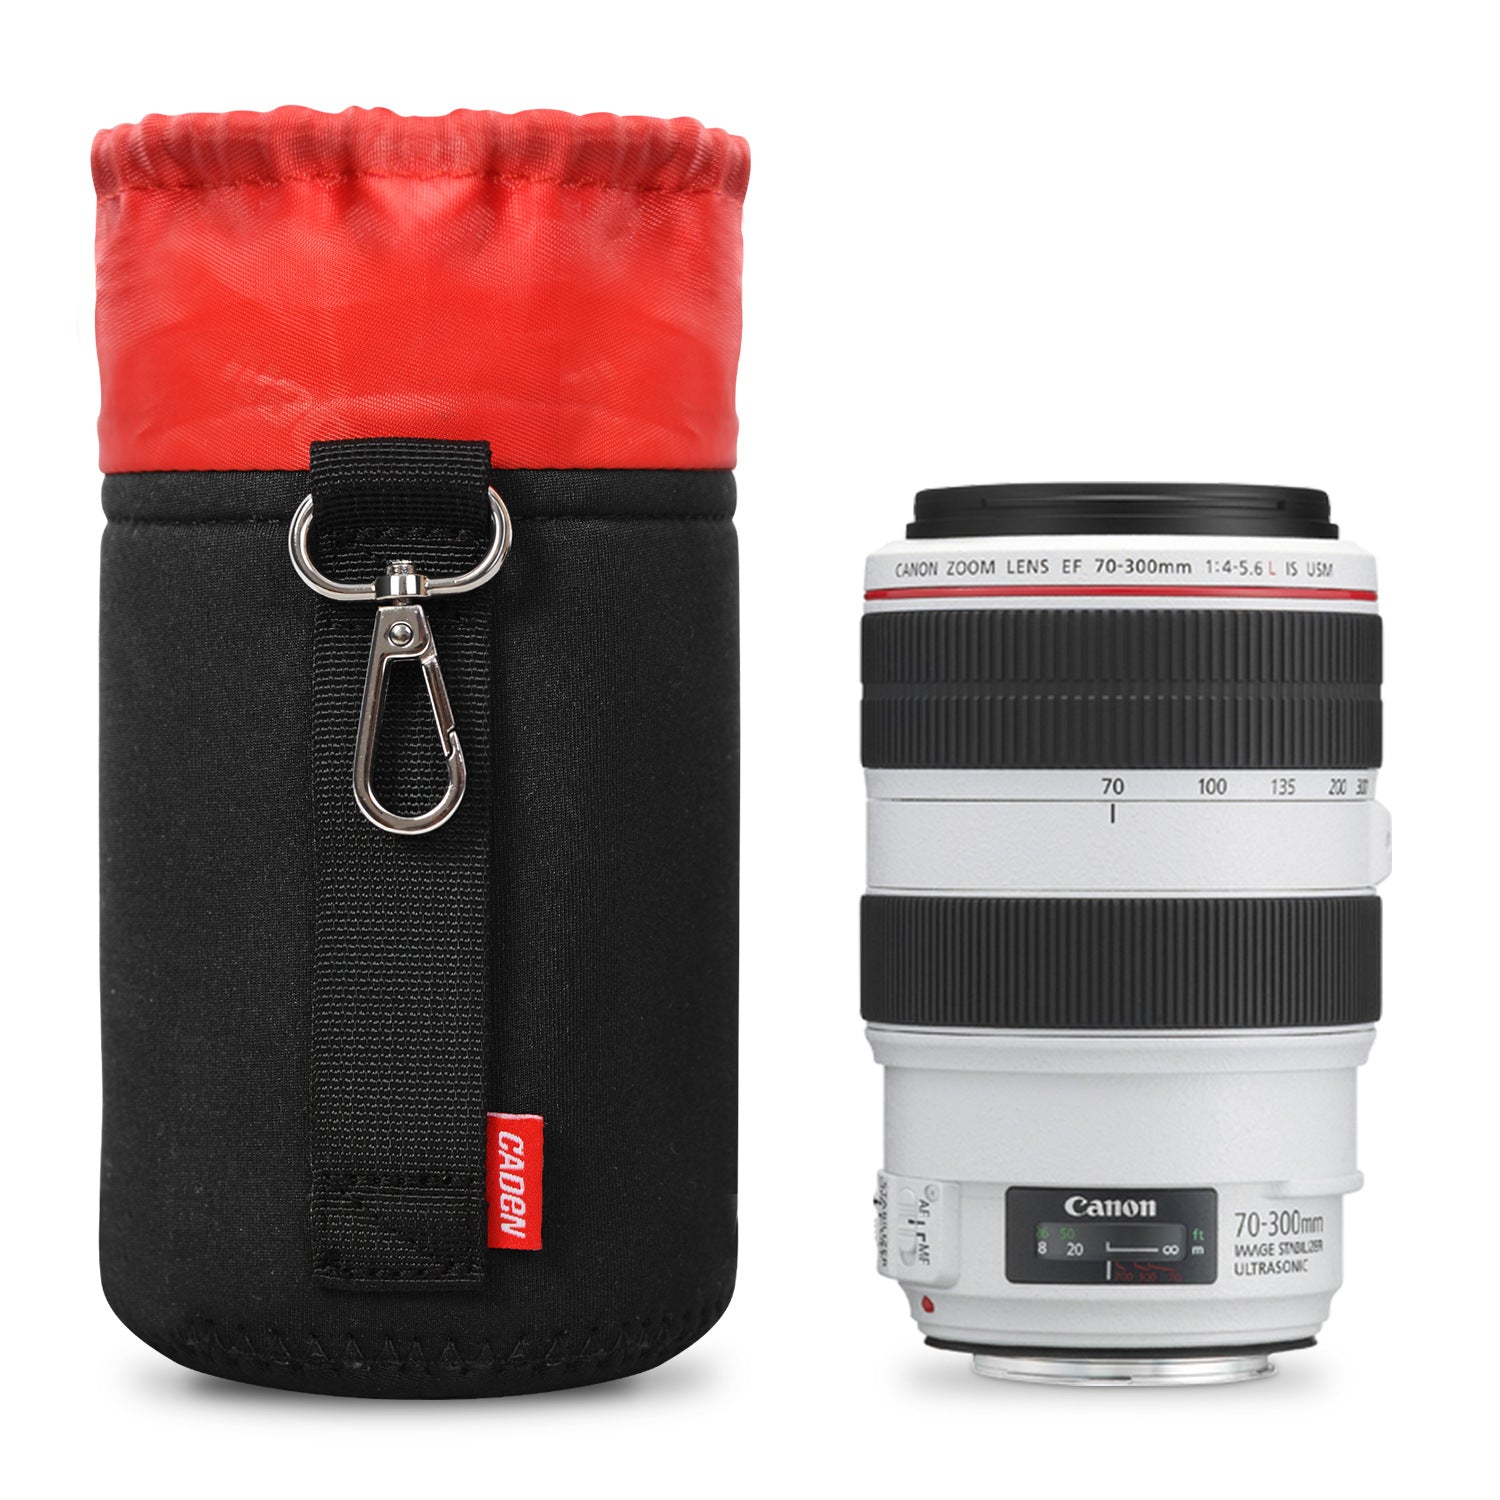 Caden Thick Neoprene Camera Lens Protective Pouch - Size: M